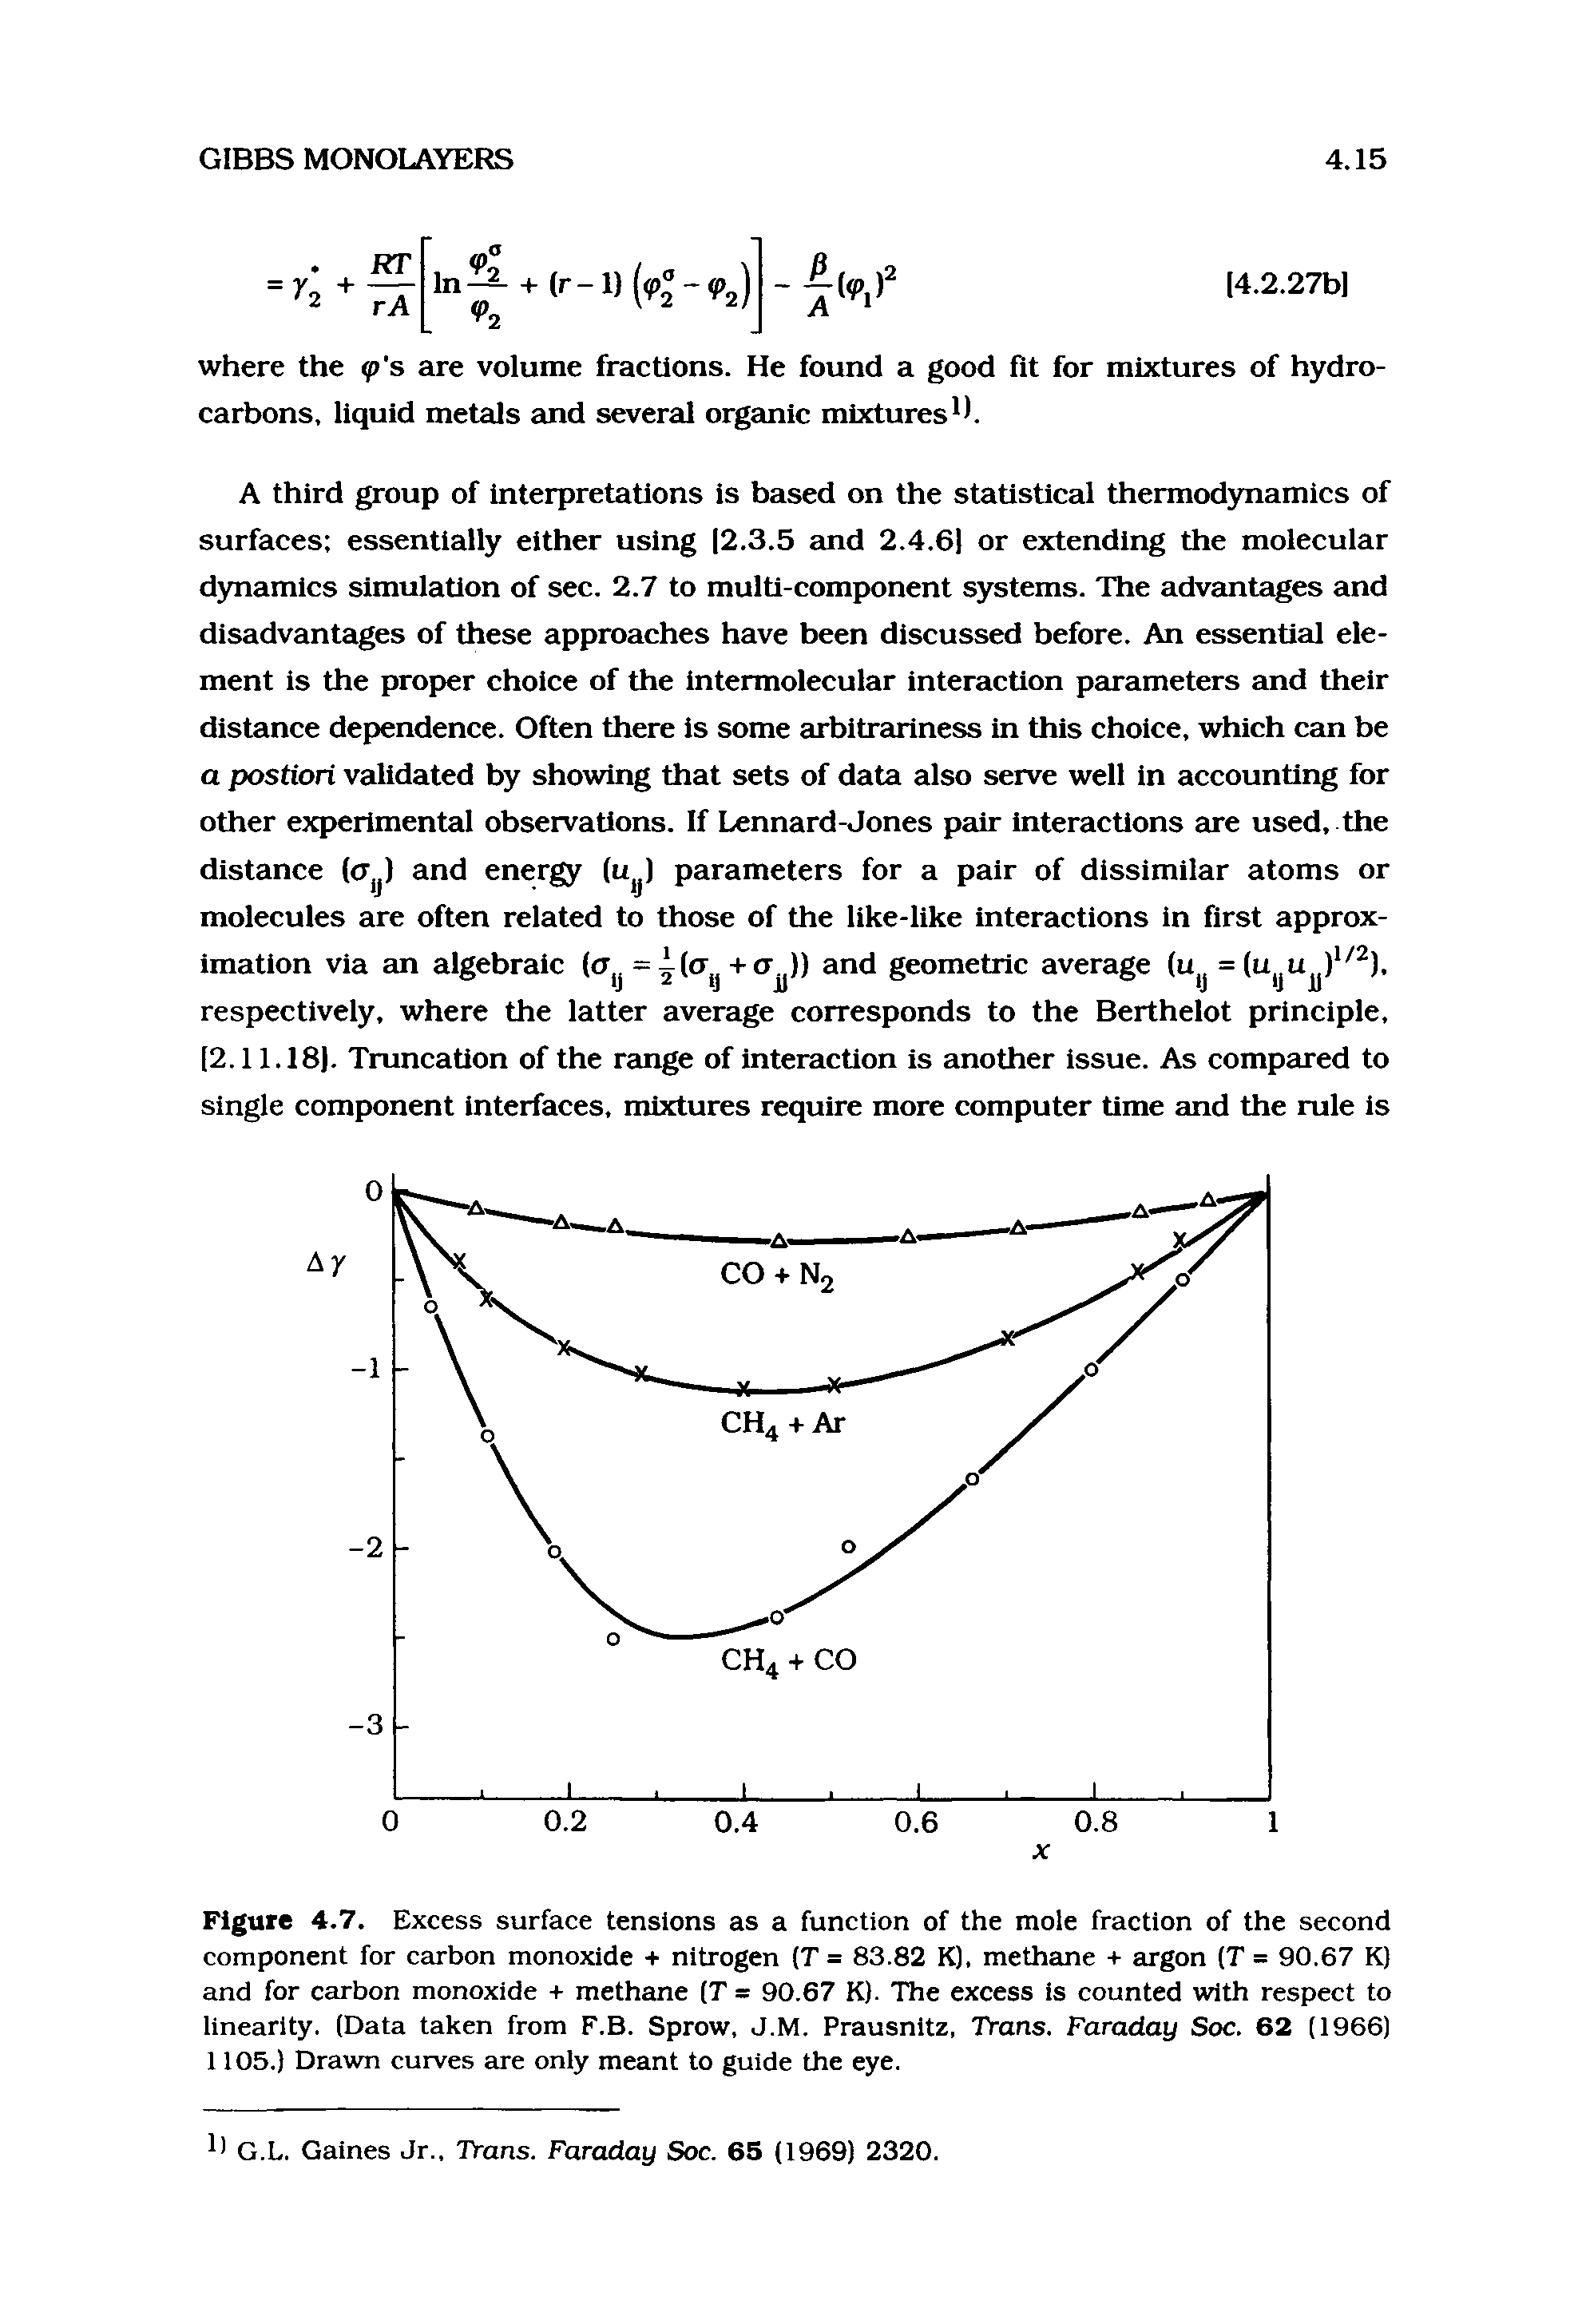 Figure 4.7. Excess surface tensions as a function of the mole fraction of the second component for carbon monoxide + nitrogen (T = 83.82 K), methane + argon (T = 90.67 K) and for carbon monoxide + methane (T = 90.67 K). The excess is counted with respect to linearity. (Data taken from F.B. Sprow, J.M. Prausnltz, Trans. Faraday Soc. 62 (1966) 1105.) Drawn curves are only meant to guide the eye.